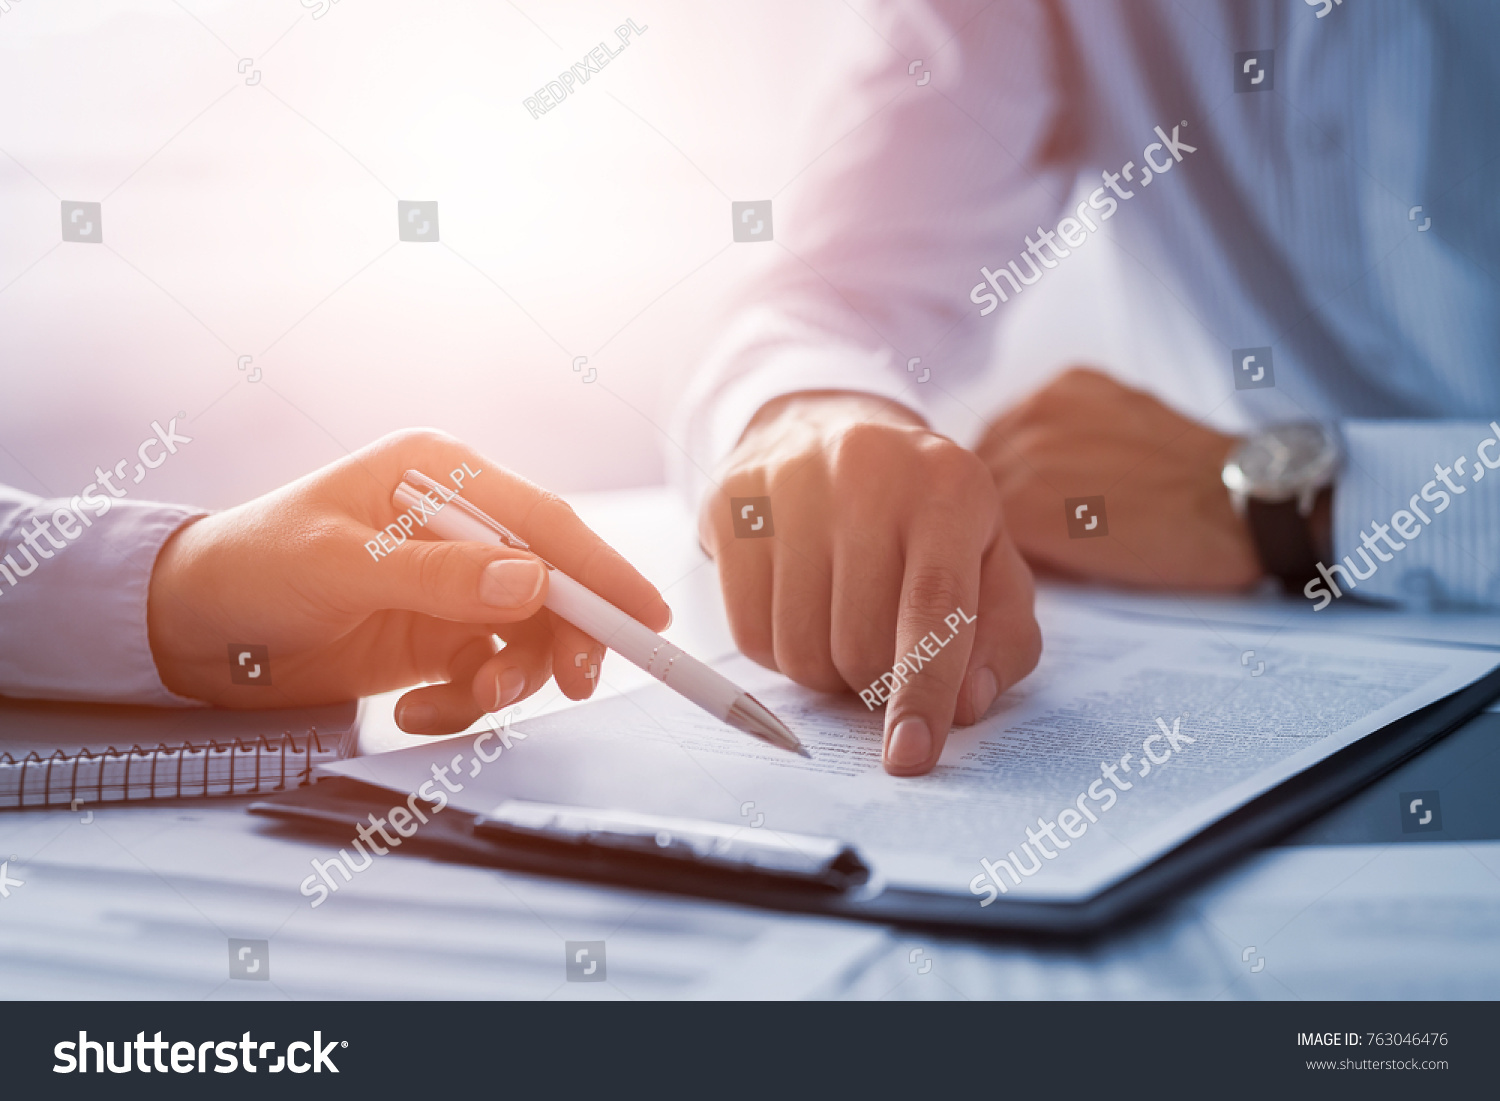 Business people negotiating a contract. Human hands working with documents at desk and signing contract. #763046476